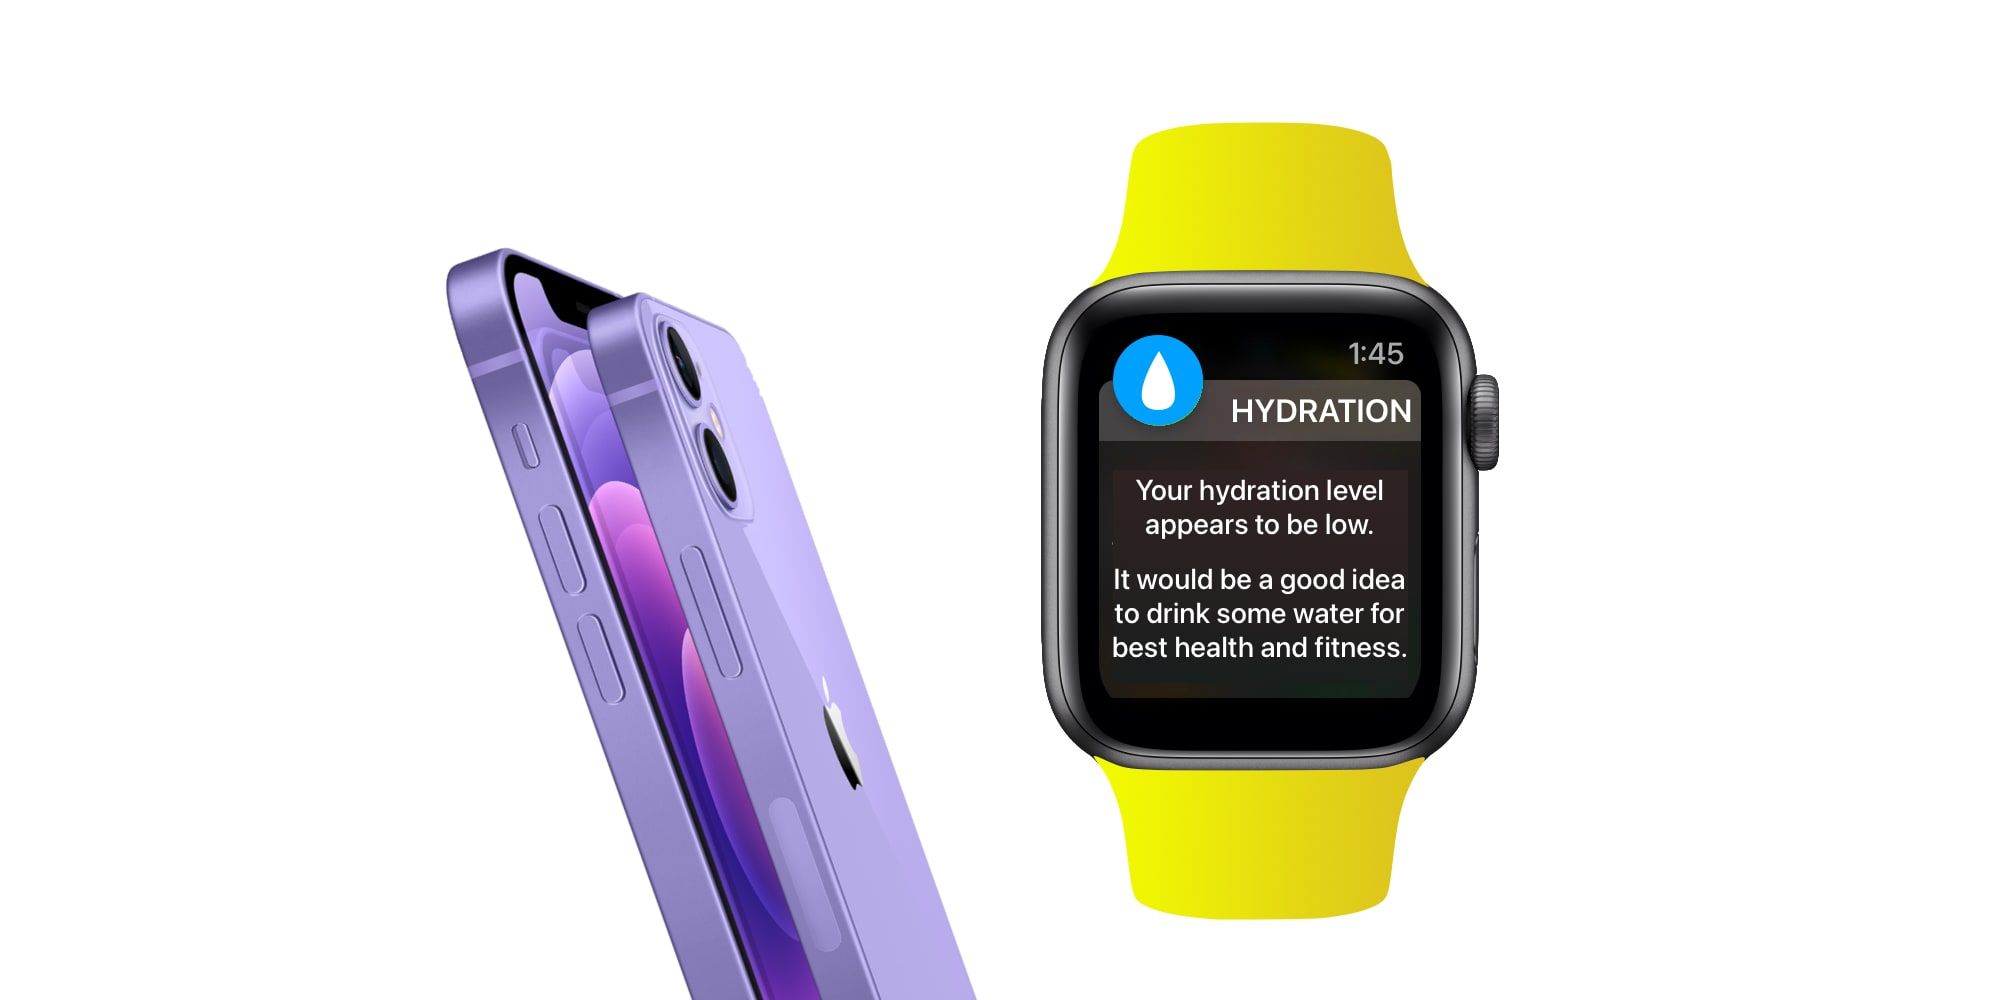 Apple Patents New Watch Feature That Tracks Hydration